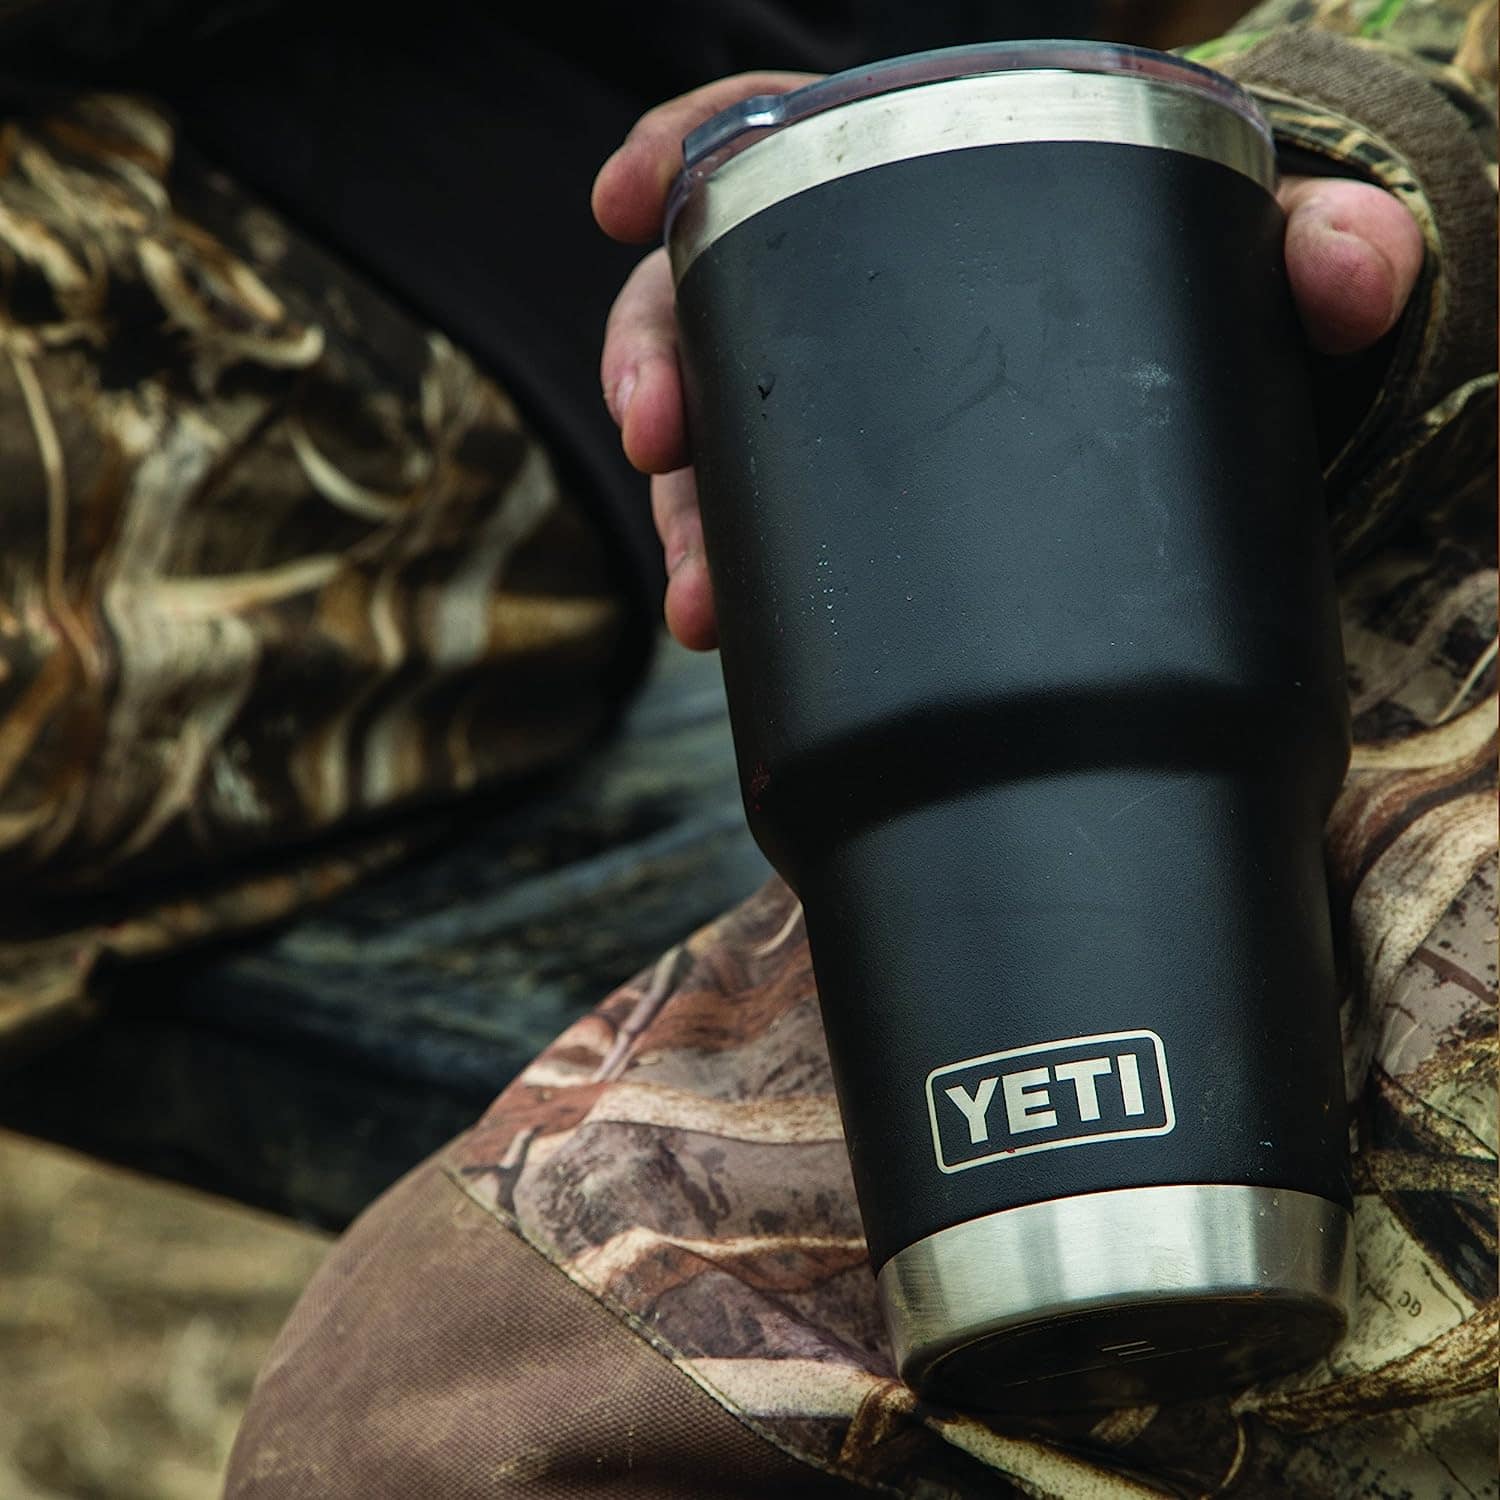 Yeti Just Launched a New Tumbler, and My Husband and I Can't Stop Fighting  Over Who Gets to Use It